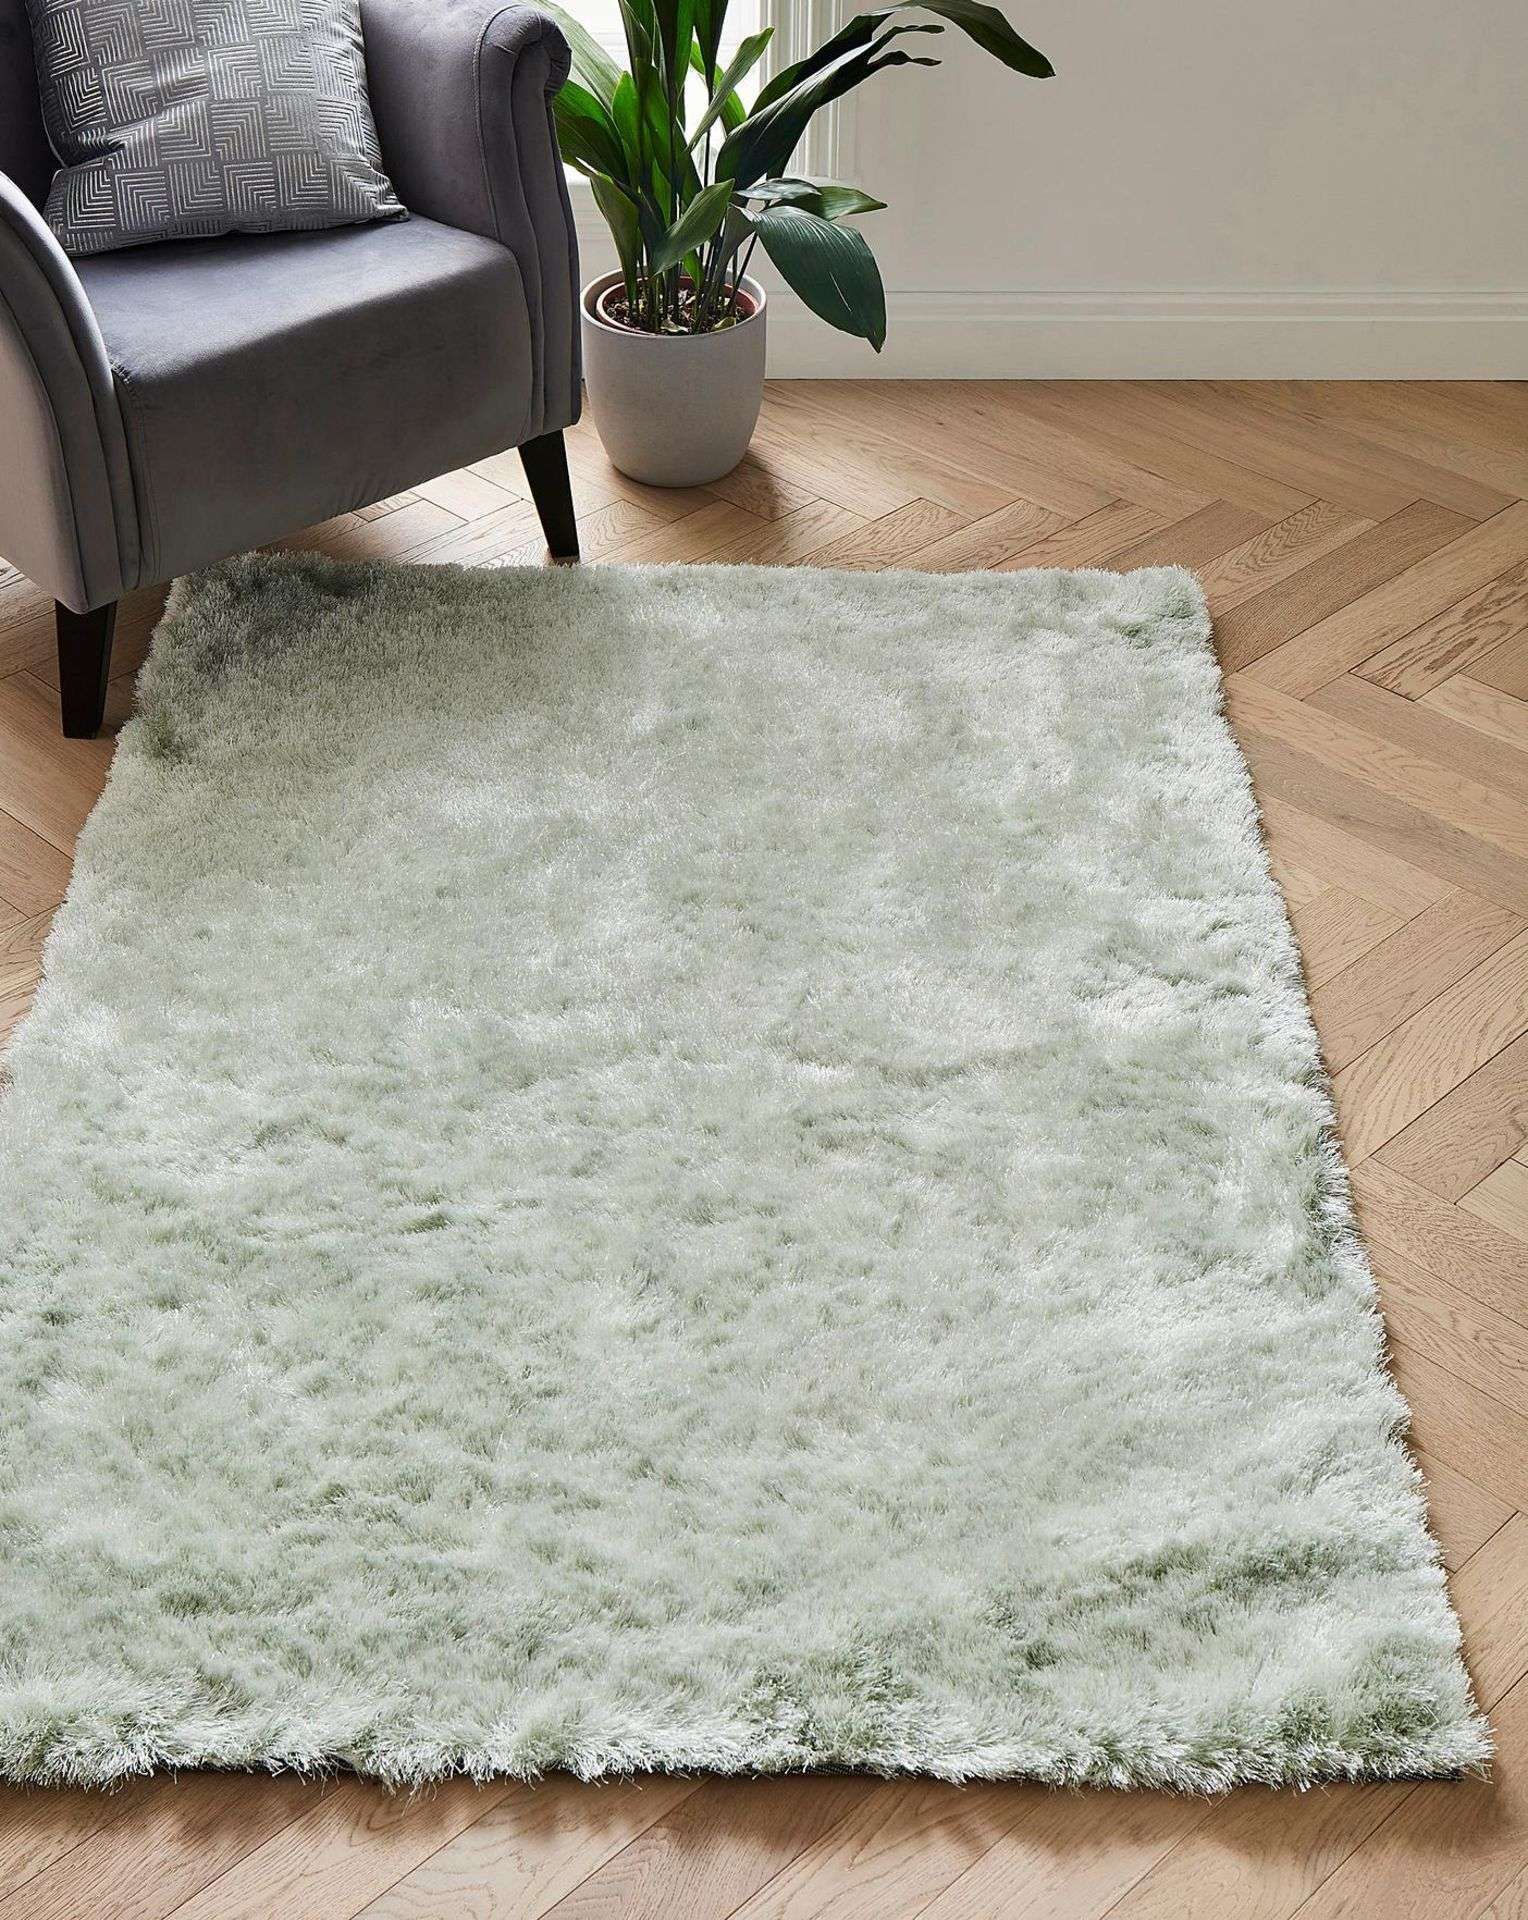 BRAND NEW Shimmer Cozy Shaggy Rug 120CM X 170CM. BLUSH. RRP £103 EACH. Add a touch of glamour to